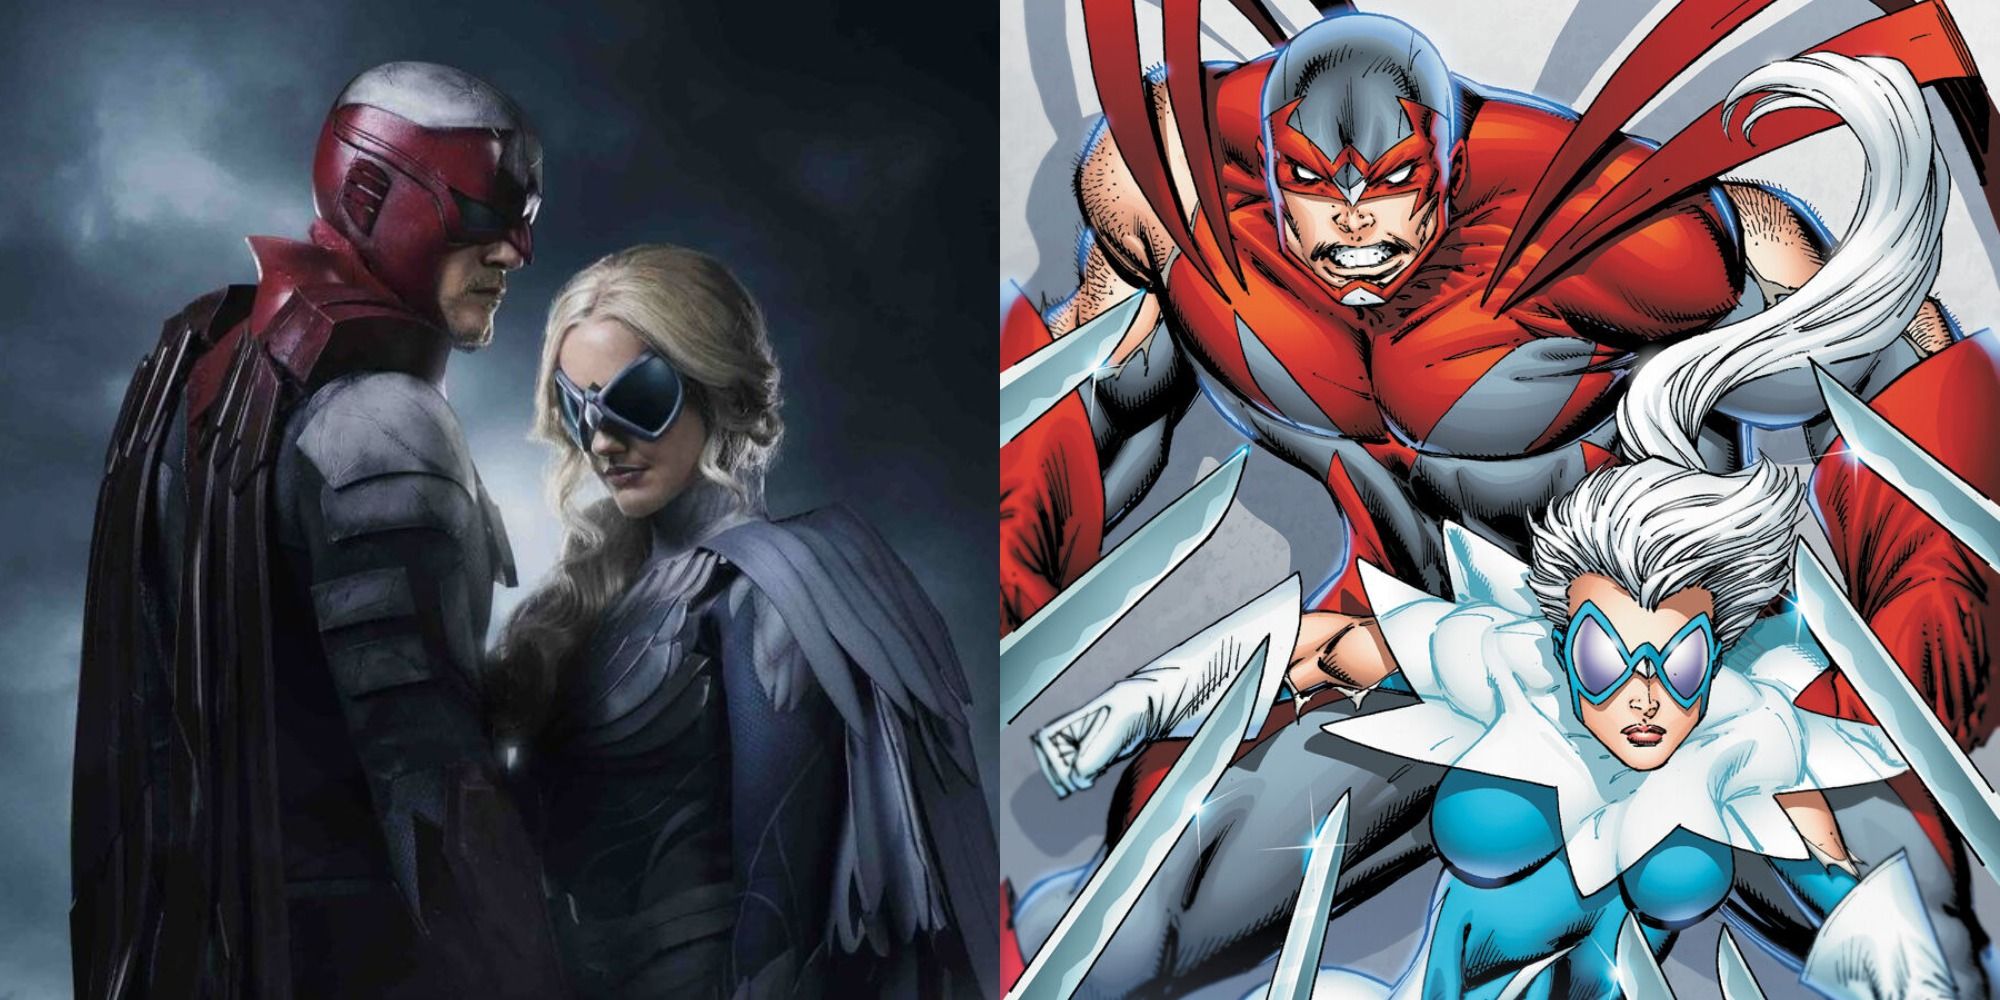 Split image showing Hawk and Dove in Titans and in the comics